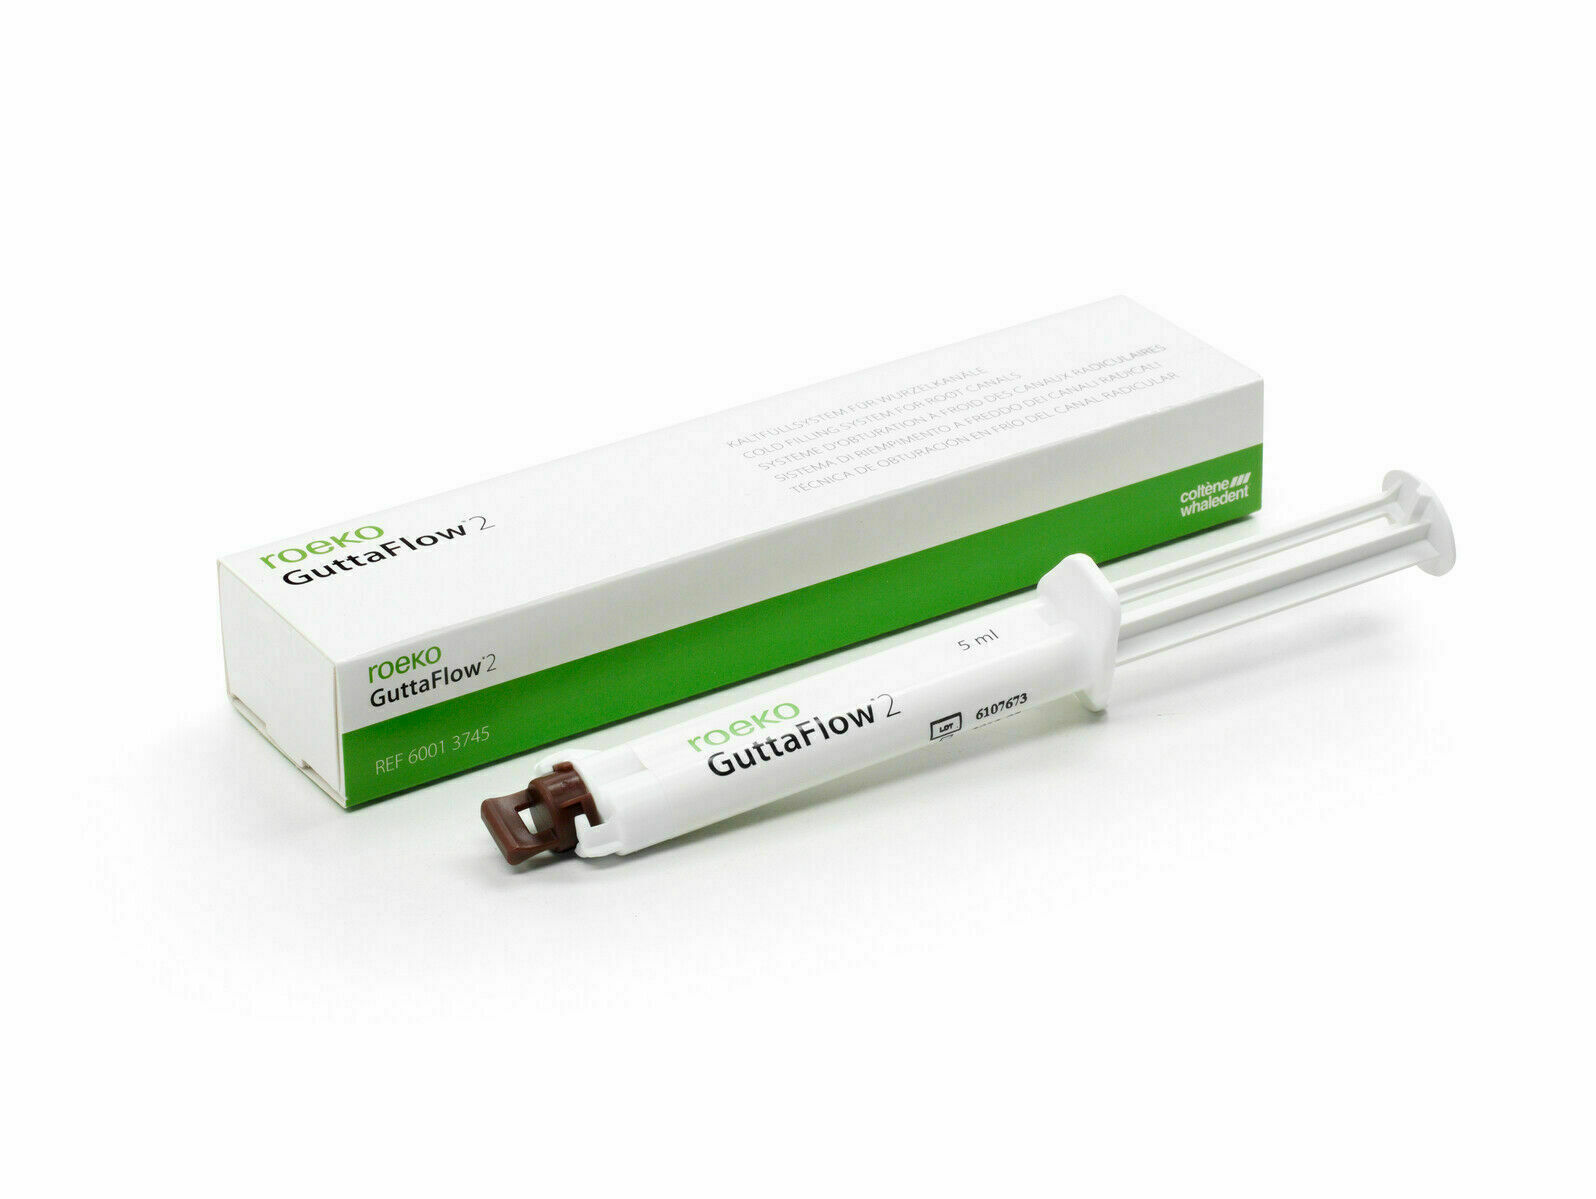 Coltene GuttaFlow2 Two in One Cold Flowable Obturation System for Root Canals.